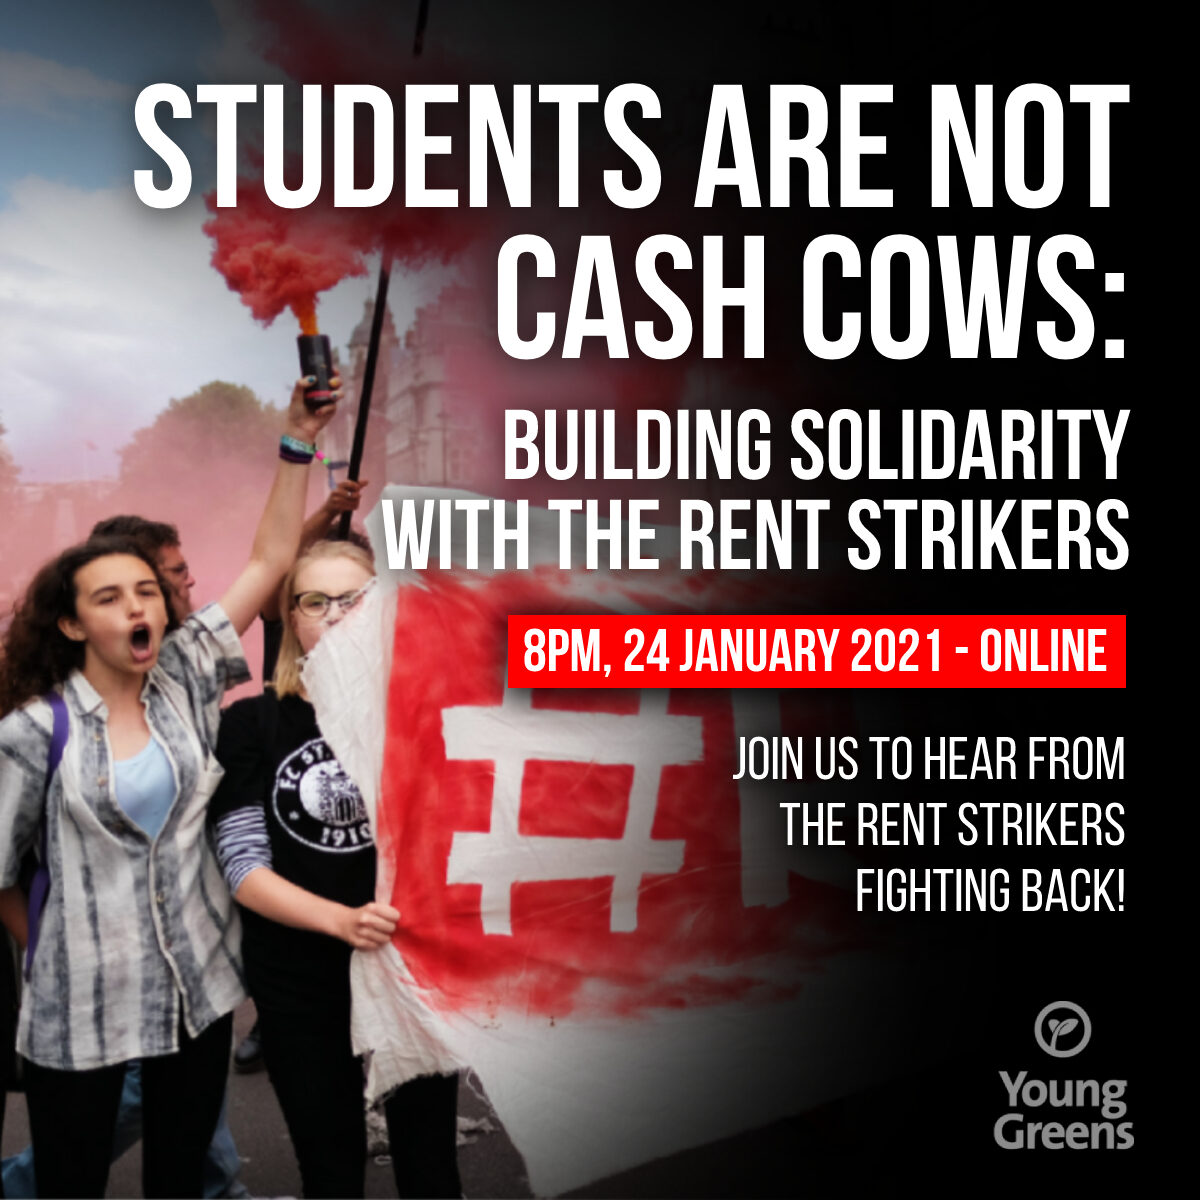 Students are not cash cows: building solidarity with the rent strikers. Img: Young person with a red flare in the air, with other protestors